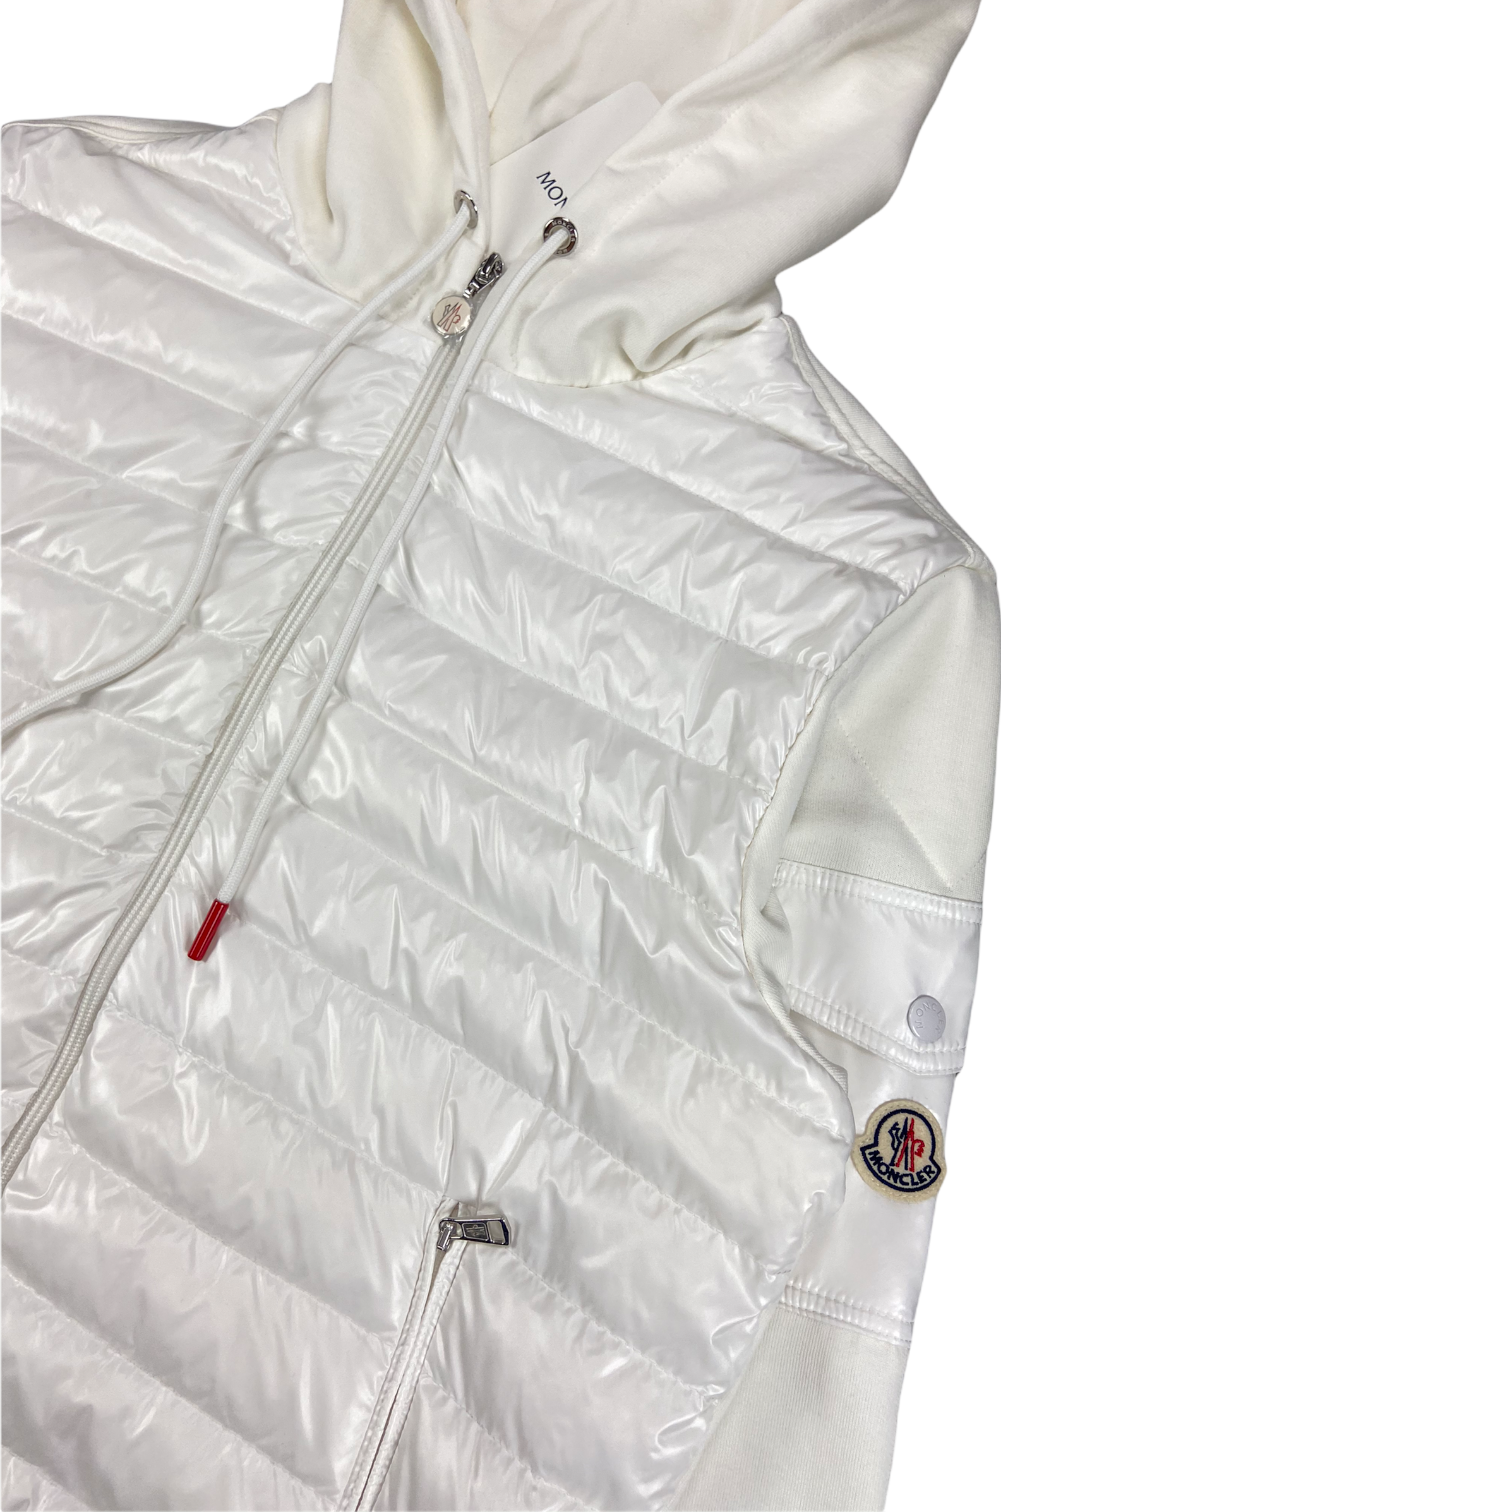 Moncler Tricot Hooded Down Cardigan